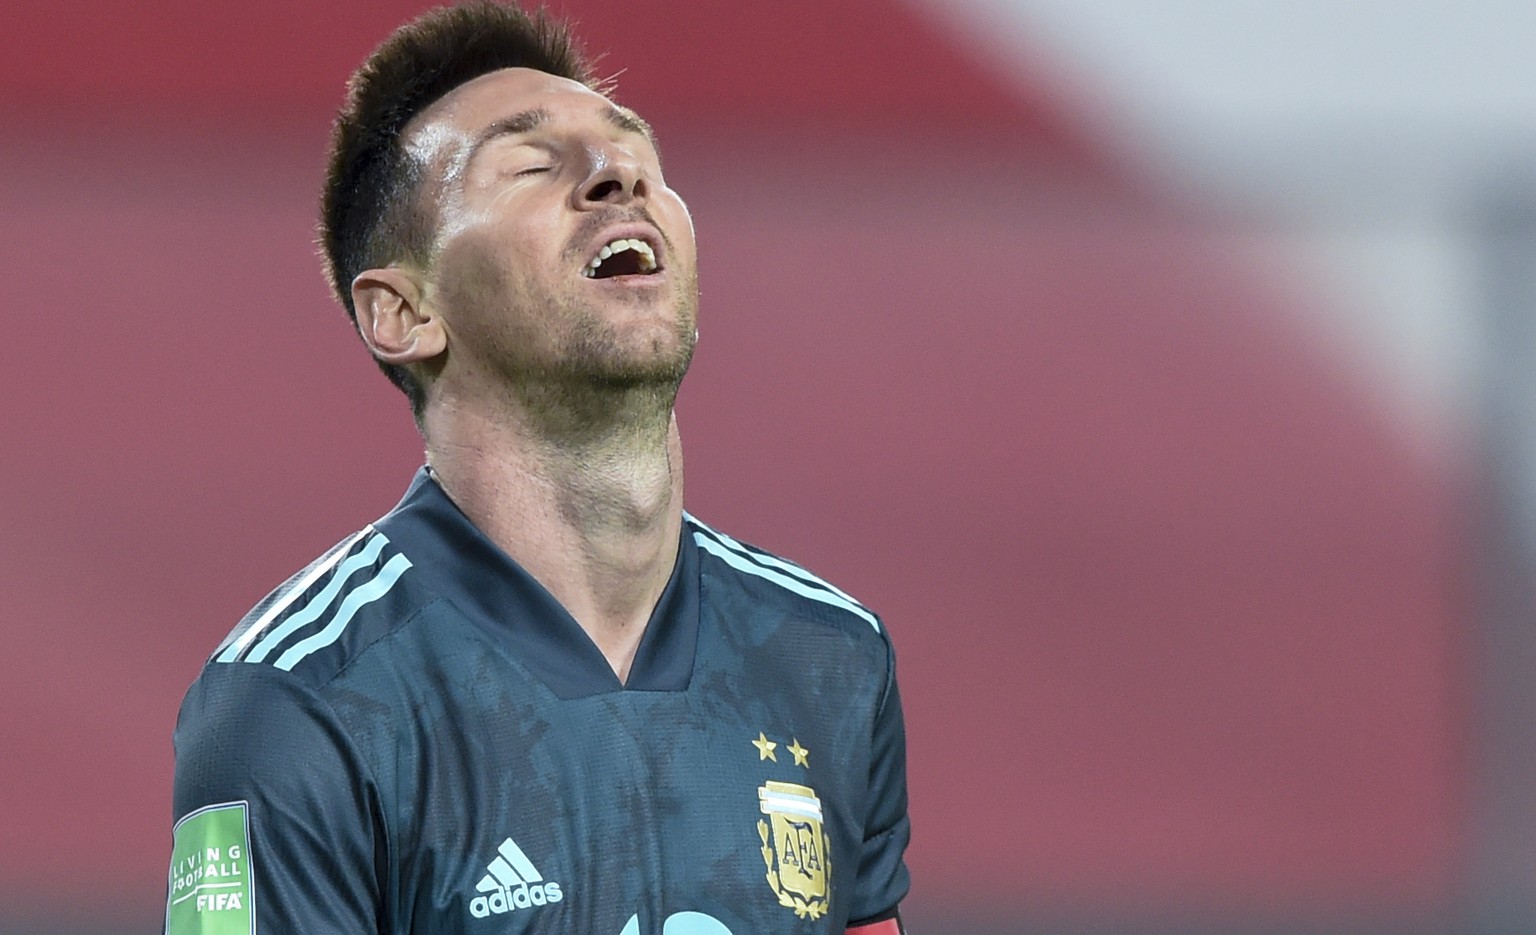 Argentina&#039;s Lionel Messi reacts during a qualifying soccer match against Peru for the FIFA World Cup Qatar 2022 in Lima, Peru, Tuesday, Nov. 17, 2020. (Ernesto Benavides, Pool via AP)